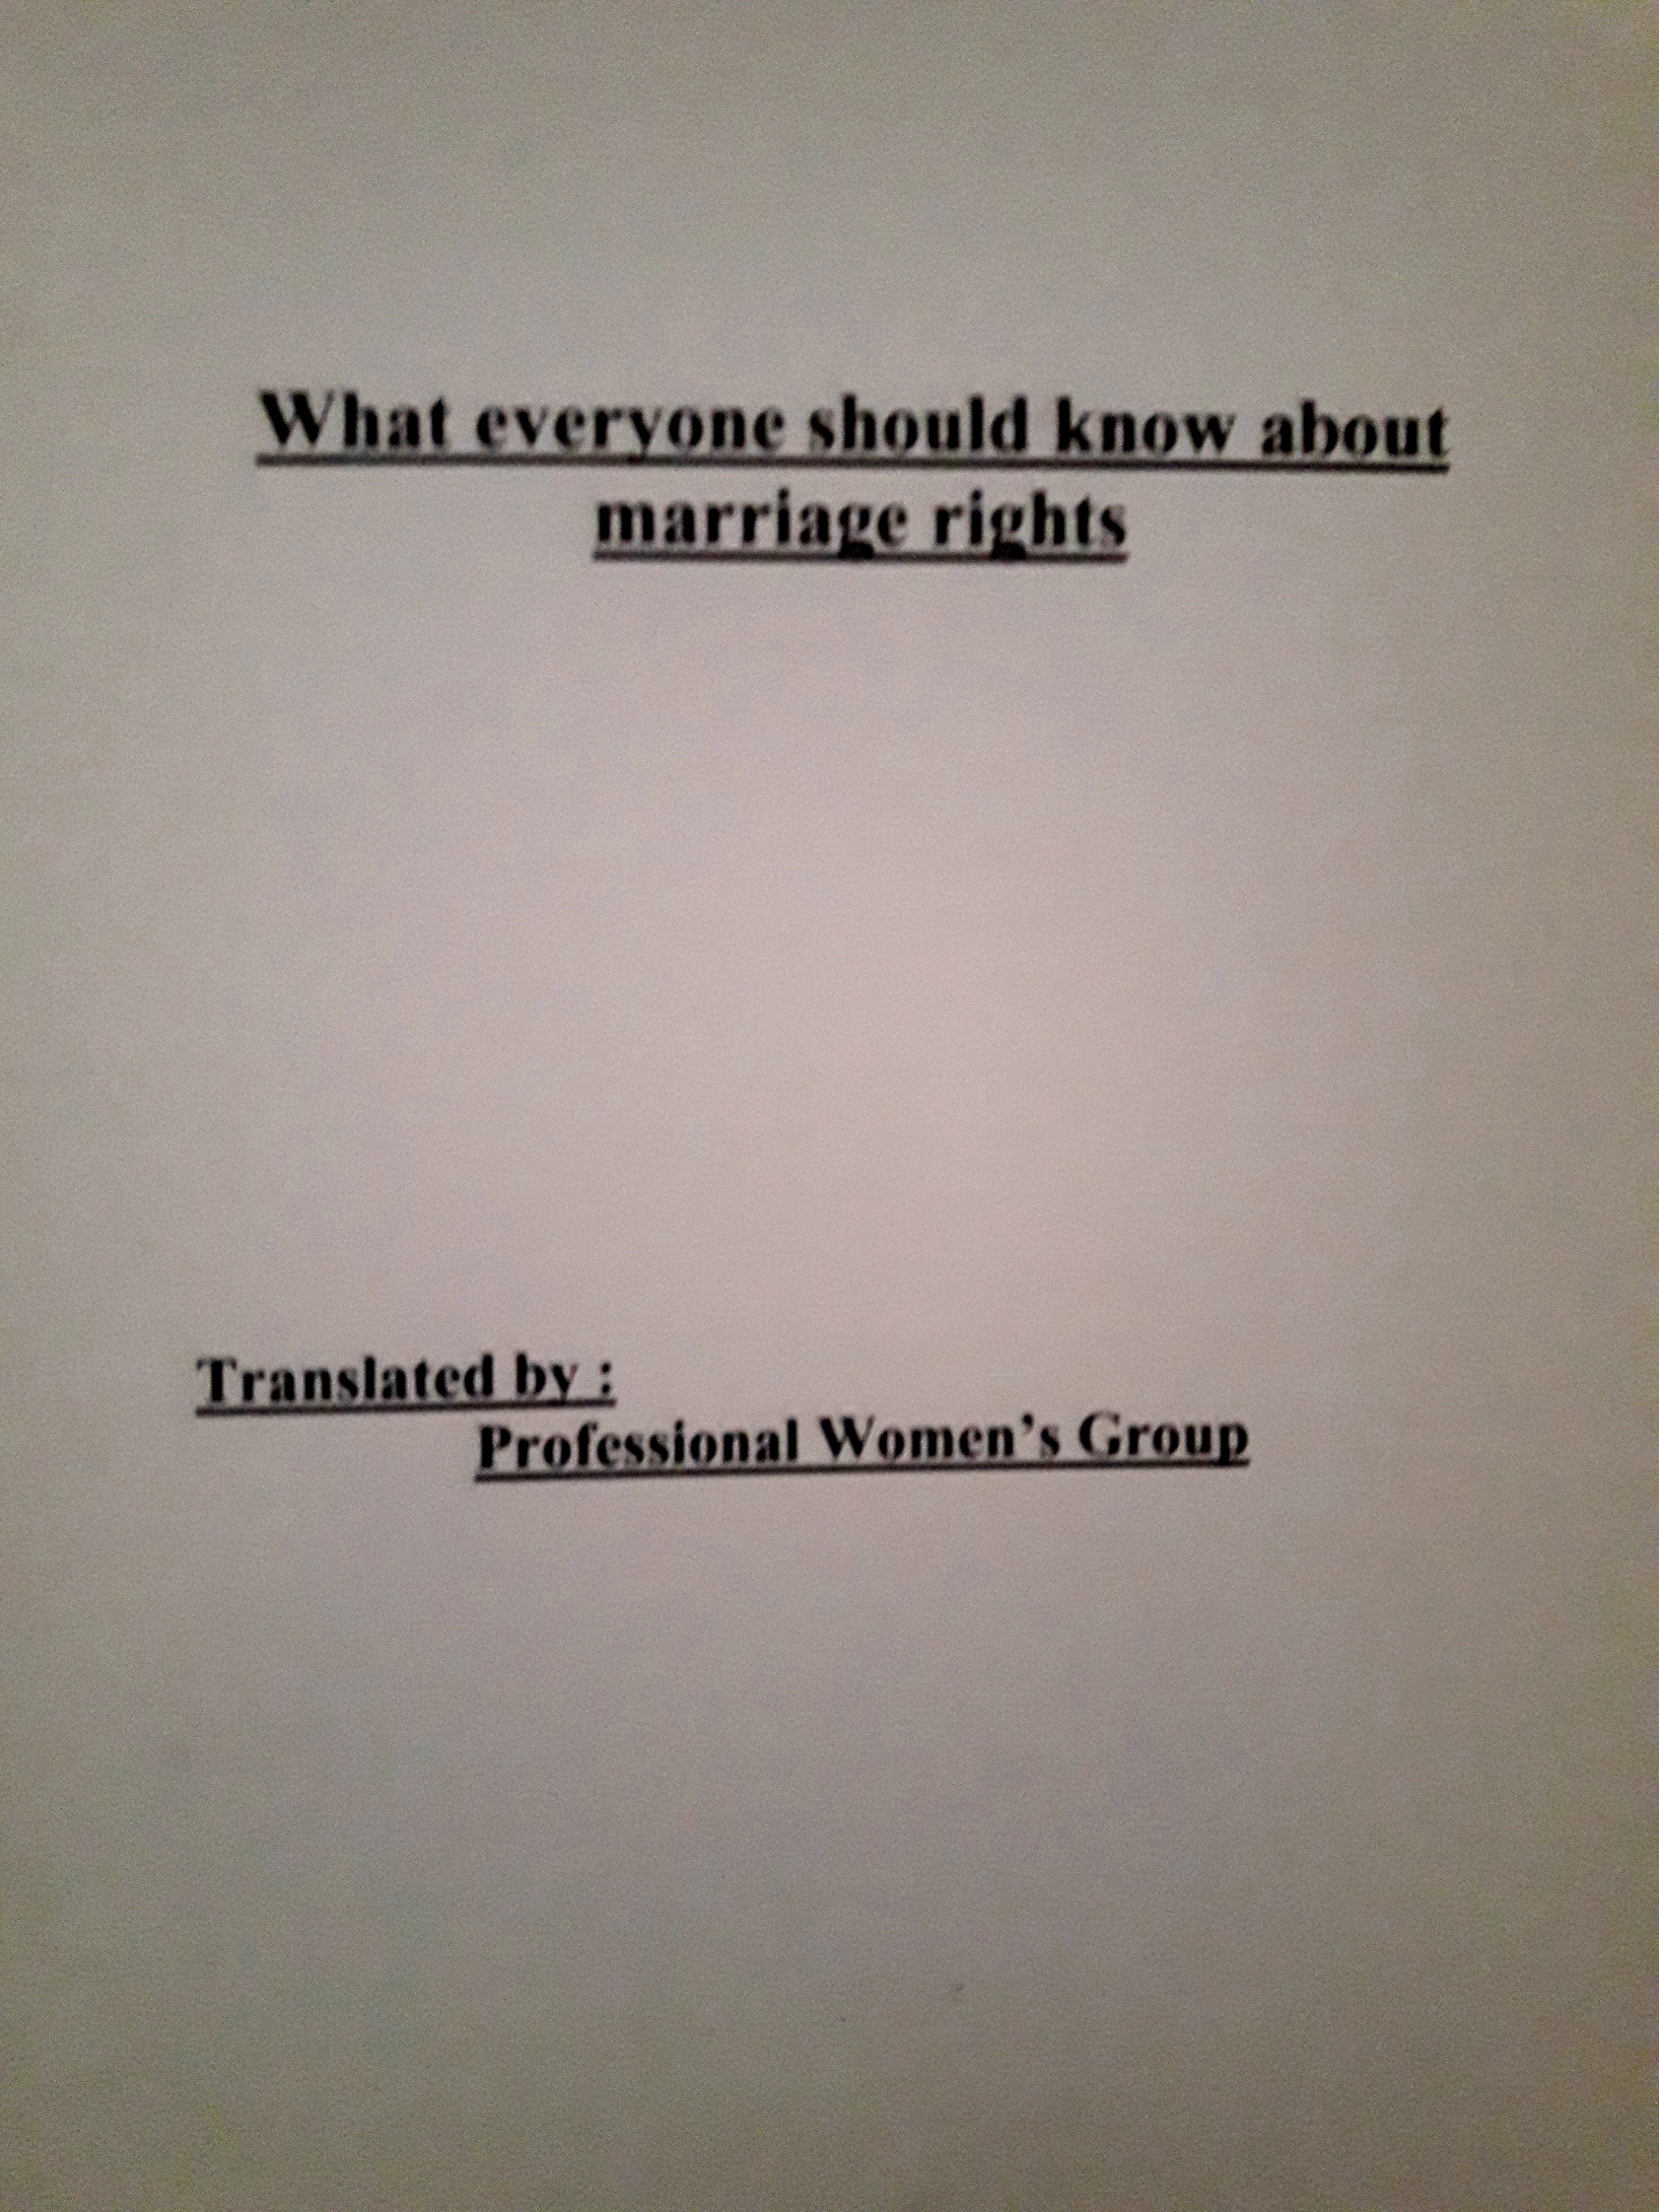 What everyone should know about marriage rights